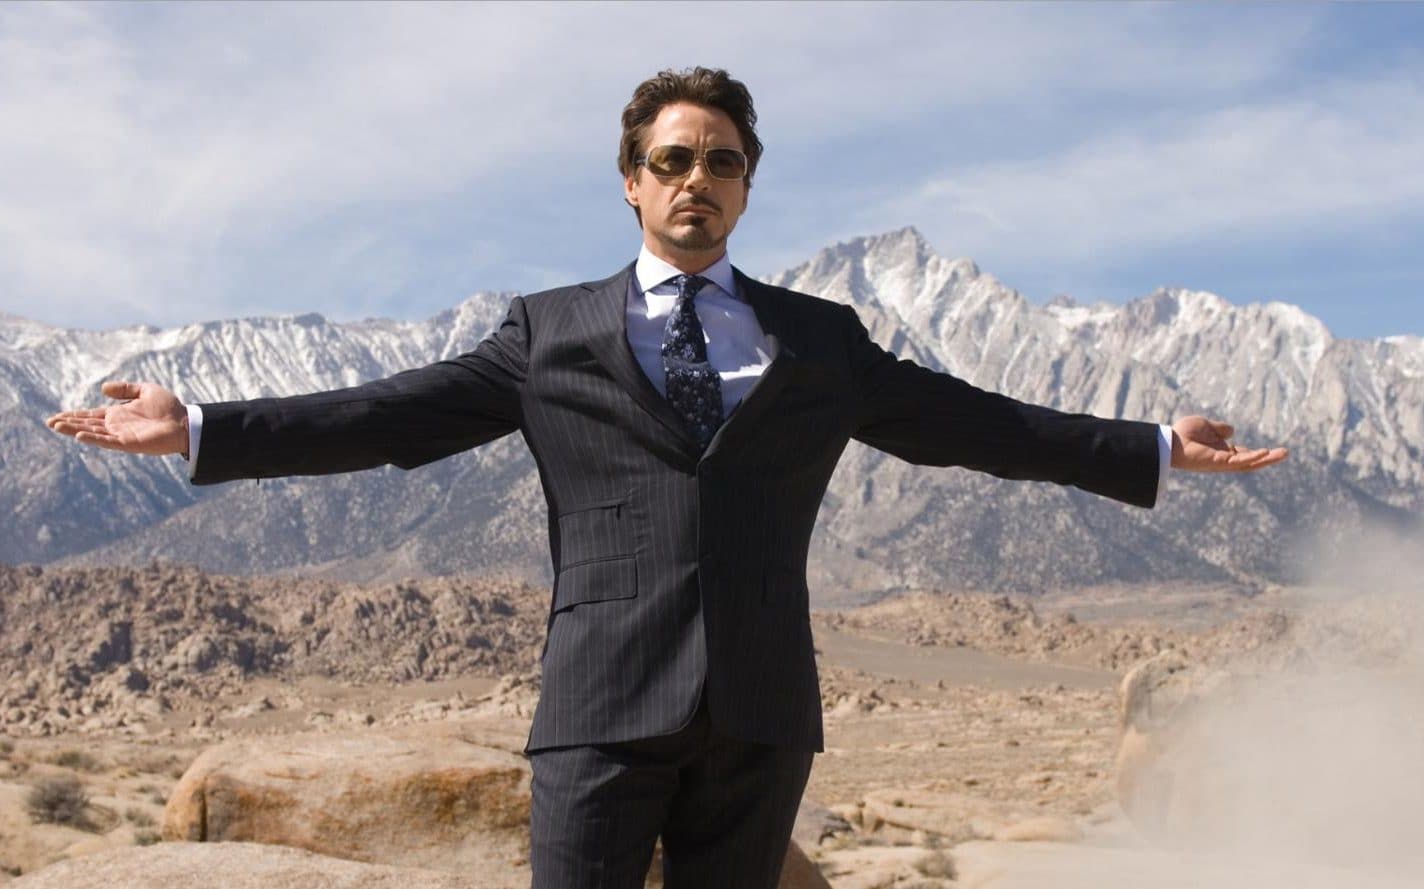 Marvel Had Doubts About Casting Downey Jr. for Iron Man